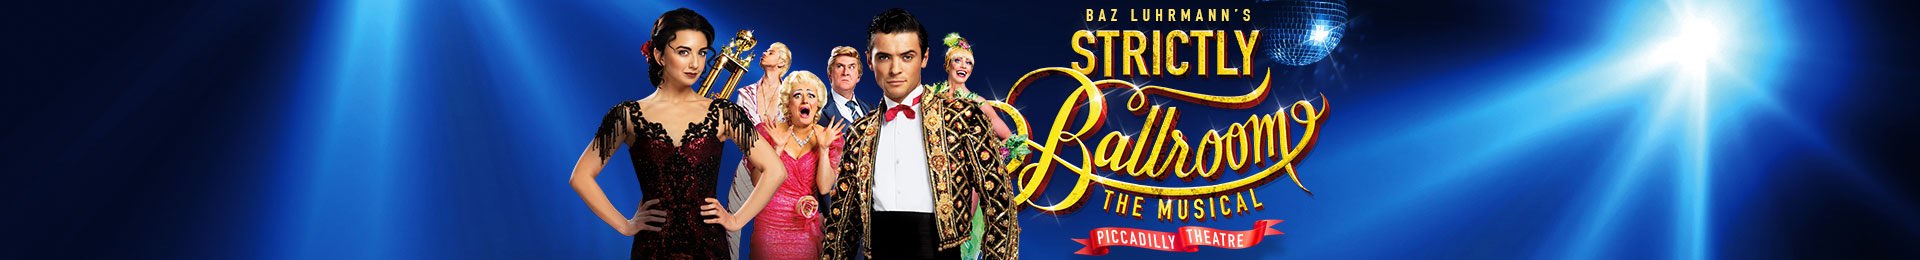 Strictly Ballroom The Musical & Dinner at Planet Hollywood banner image